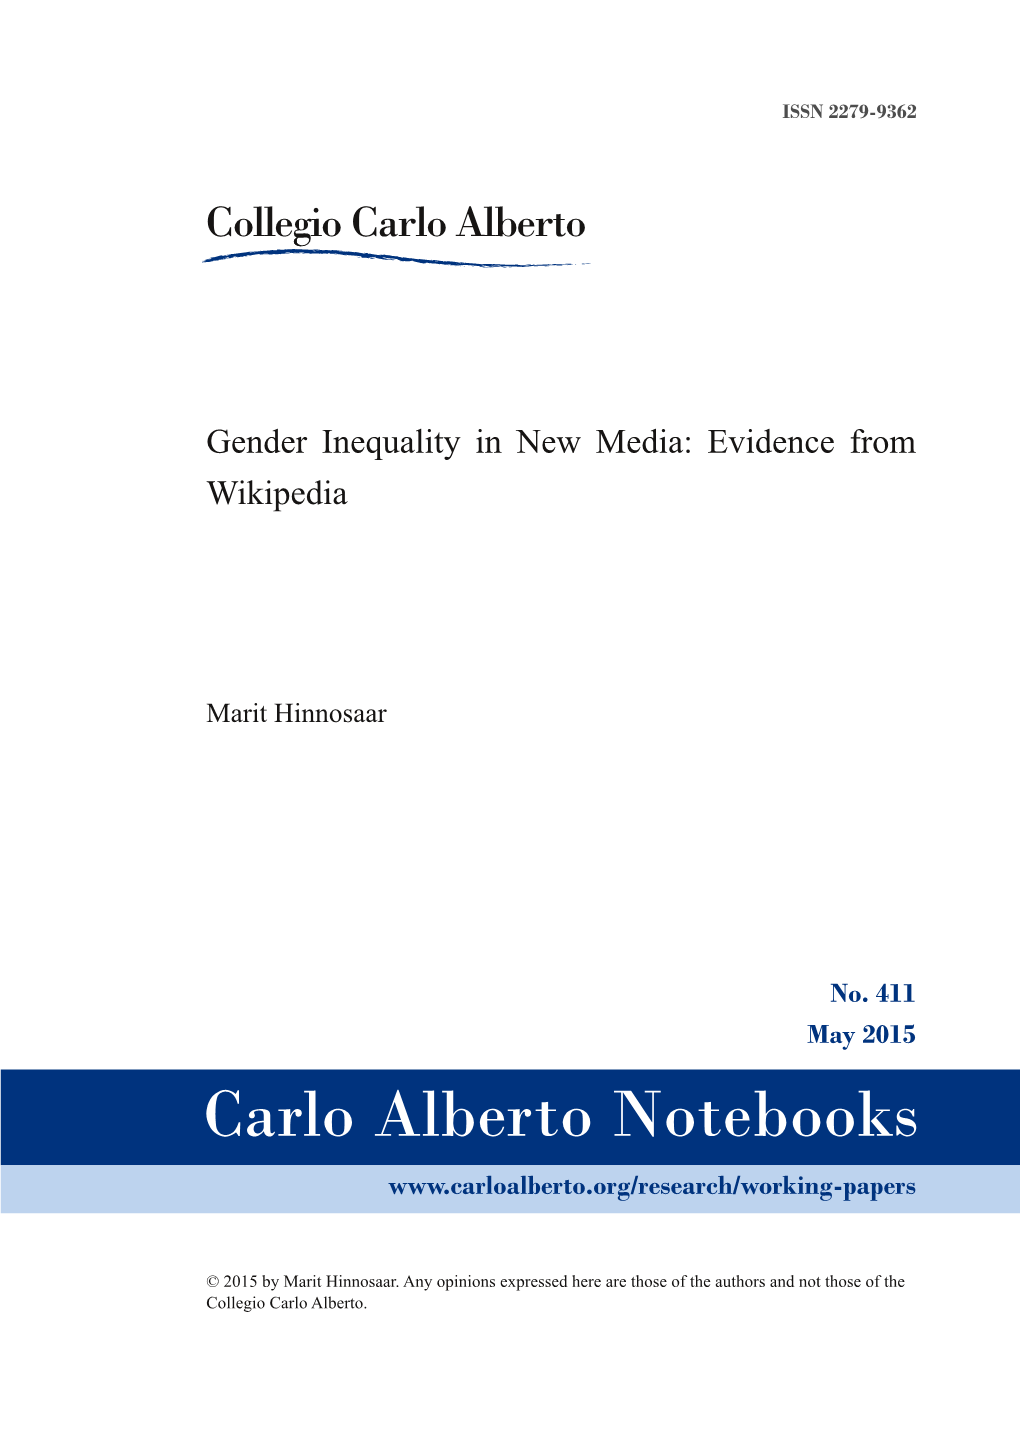 Gender Inequality in New Media: Evidence from Wikipedia